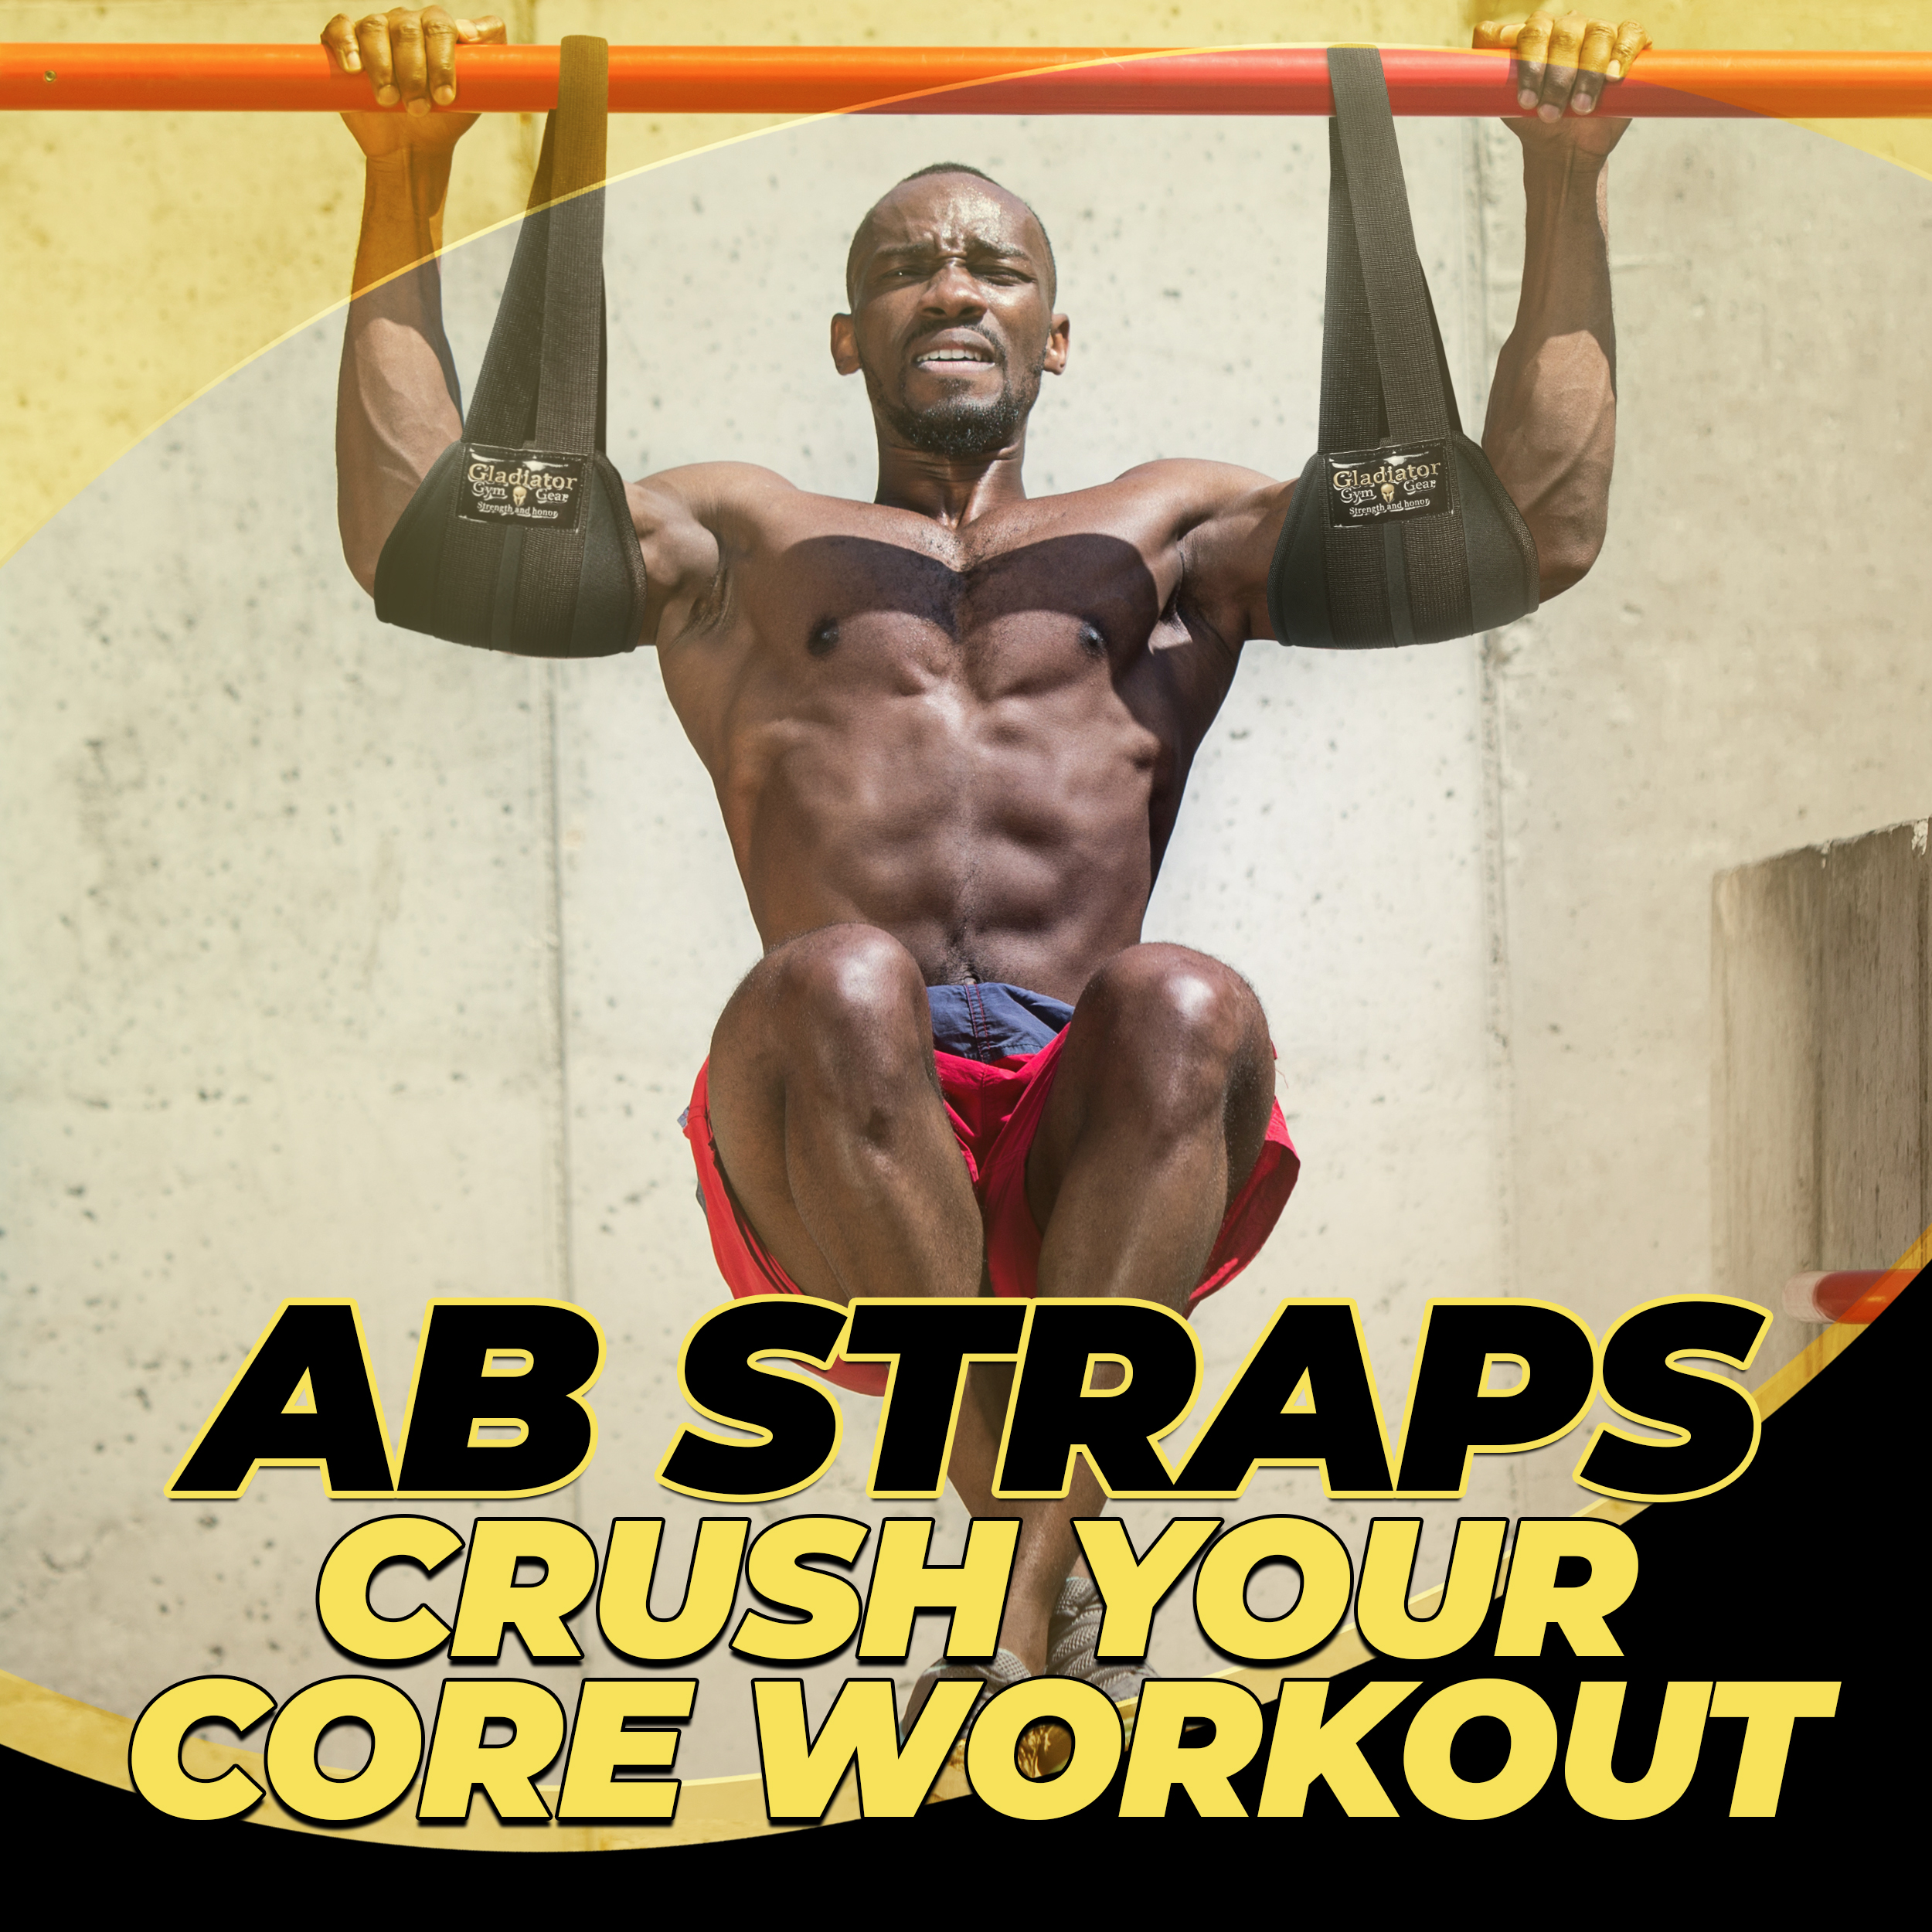 How to Use Ab Straps for Pull-Ups, Abs Workout